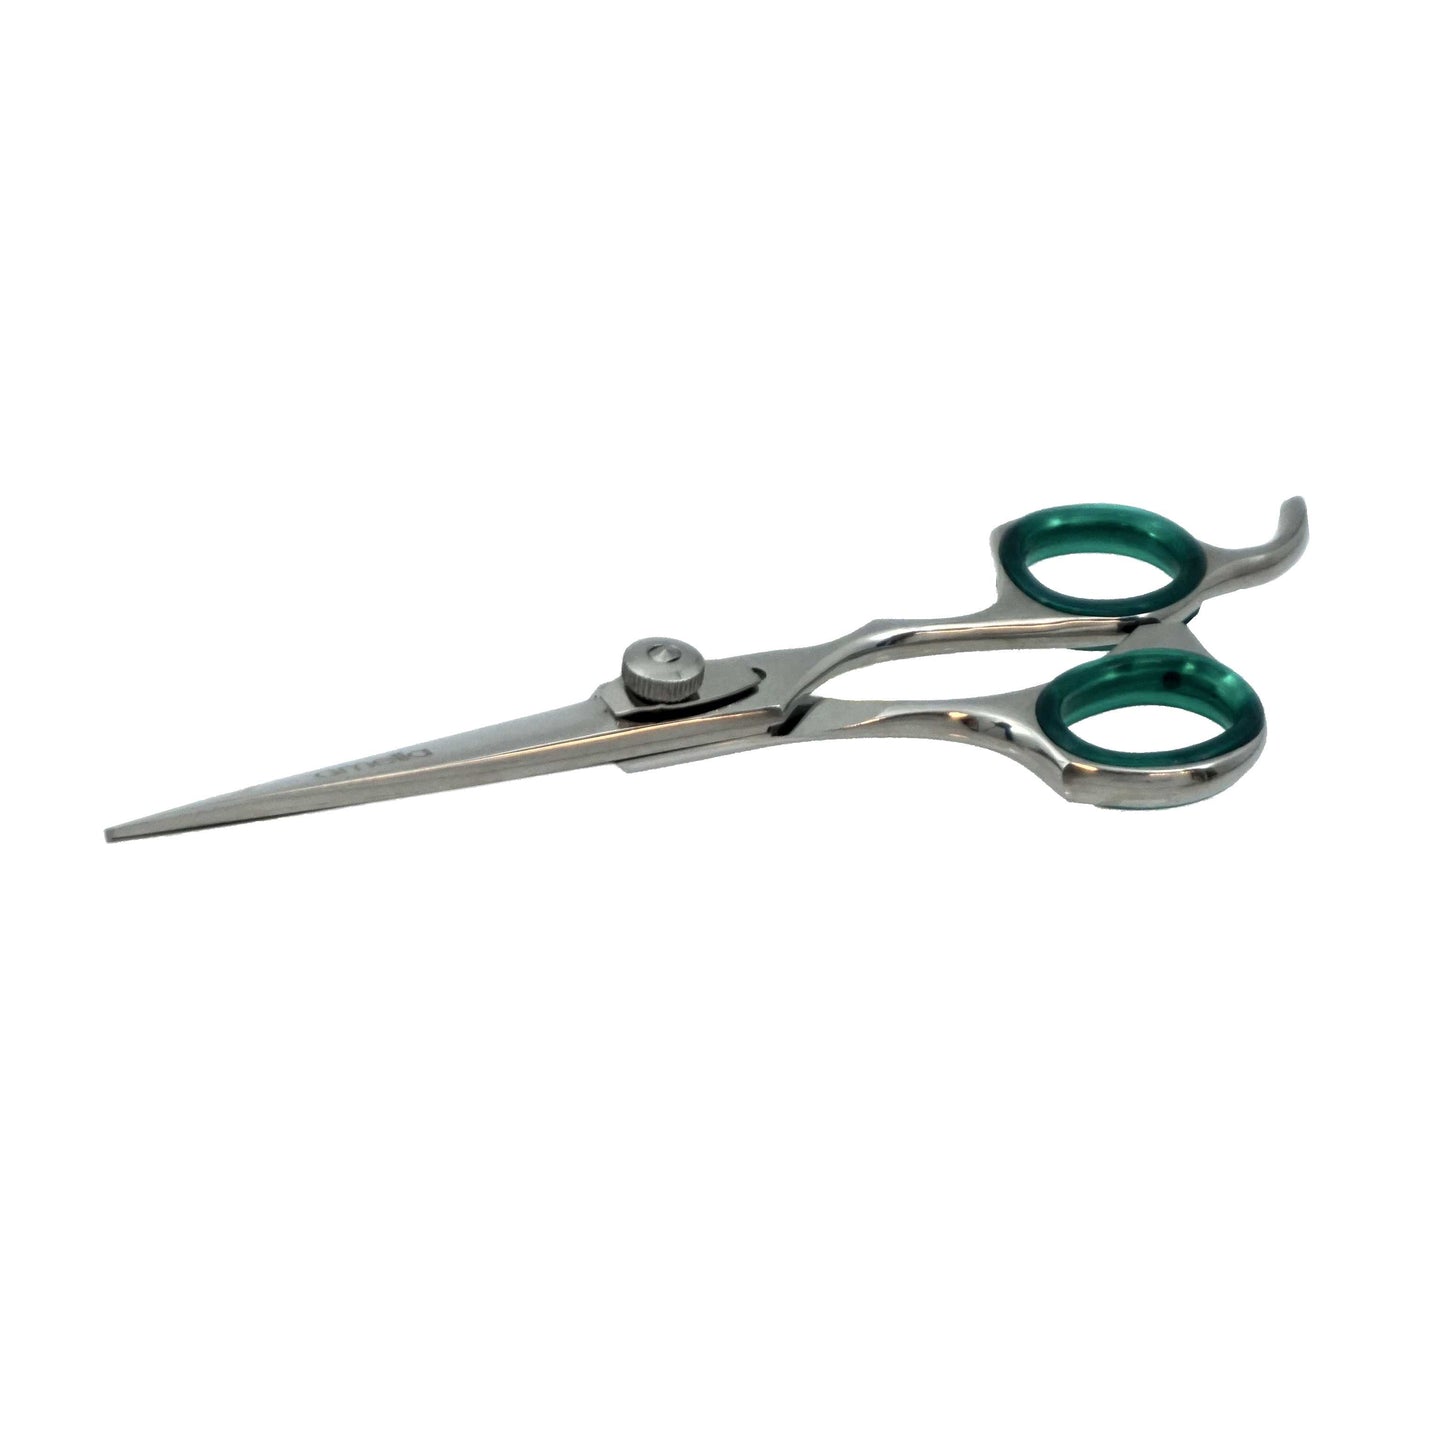 6.0" Right Handed, Stainless Steel Professional Shear, Fixed Finger Rest